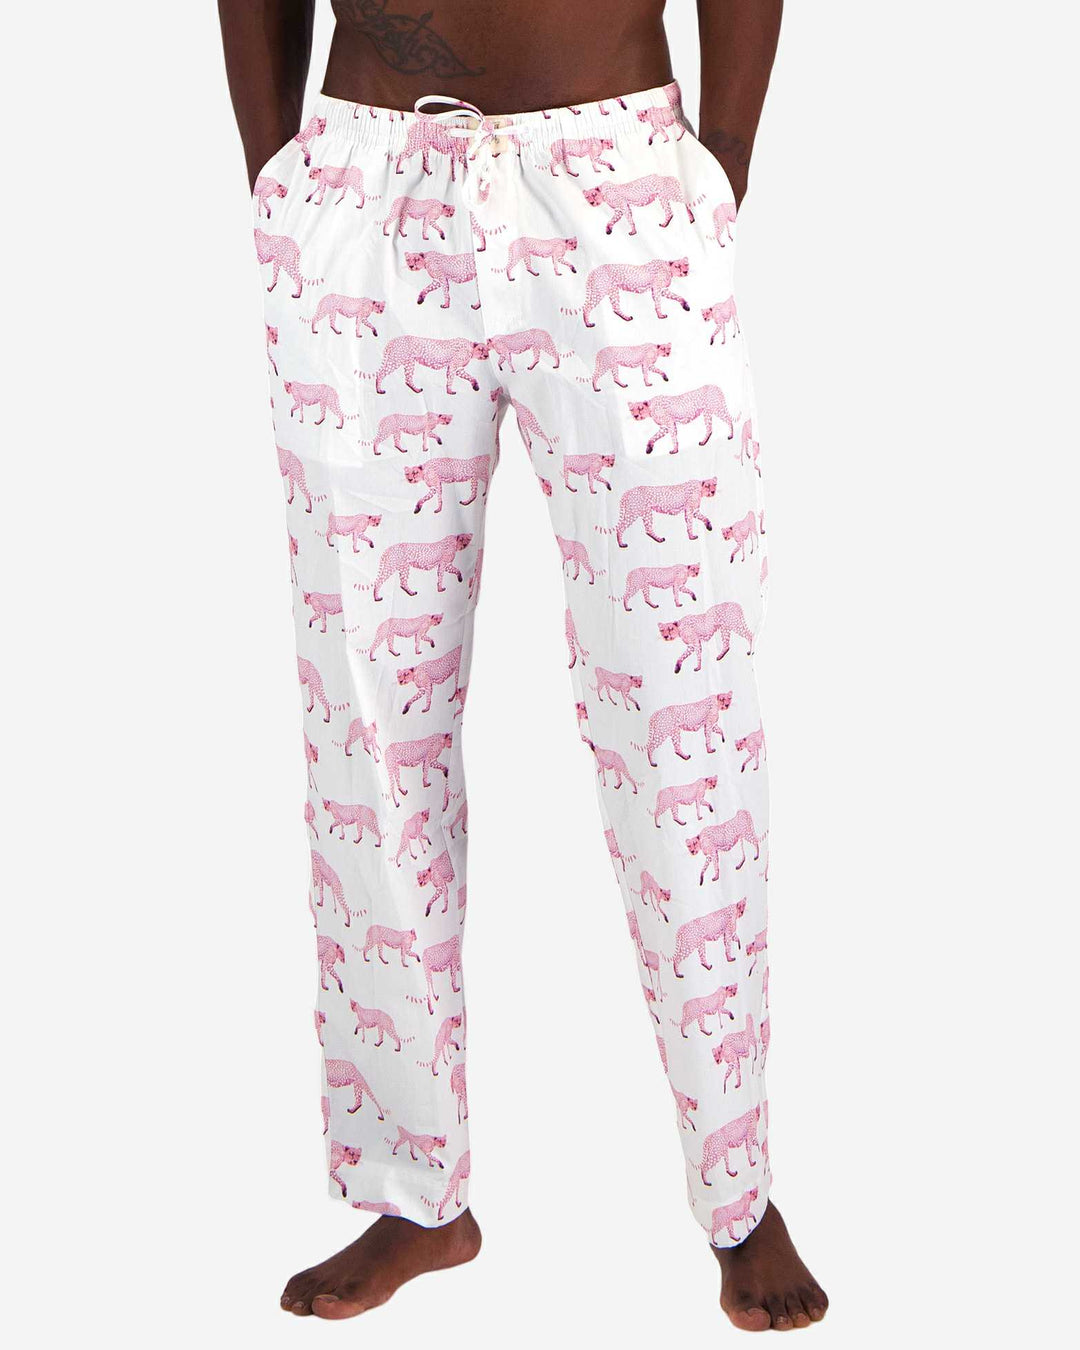 Men's lounge pants with with pink cheetahs